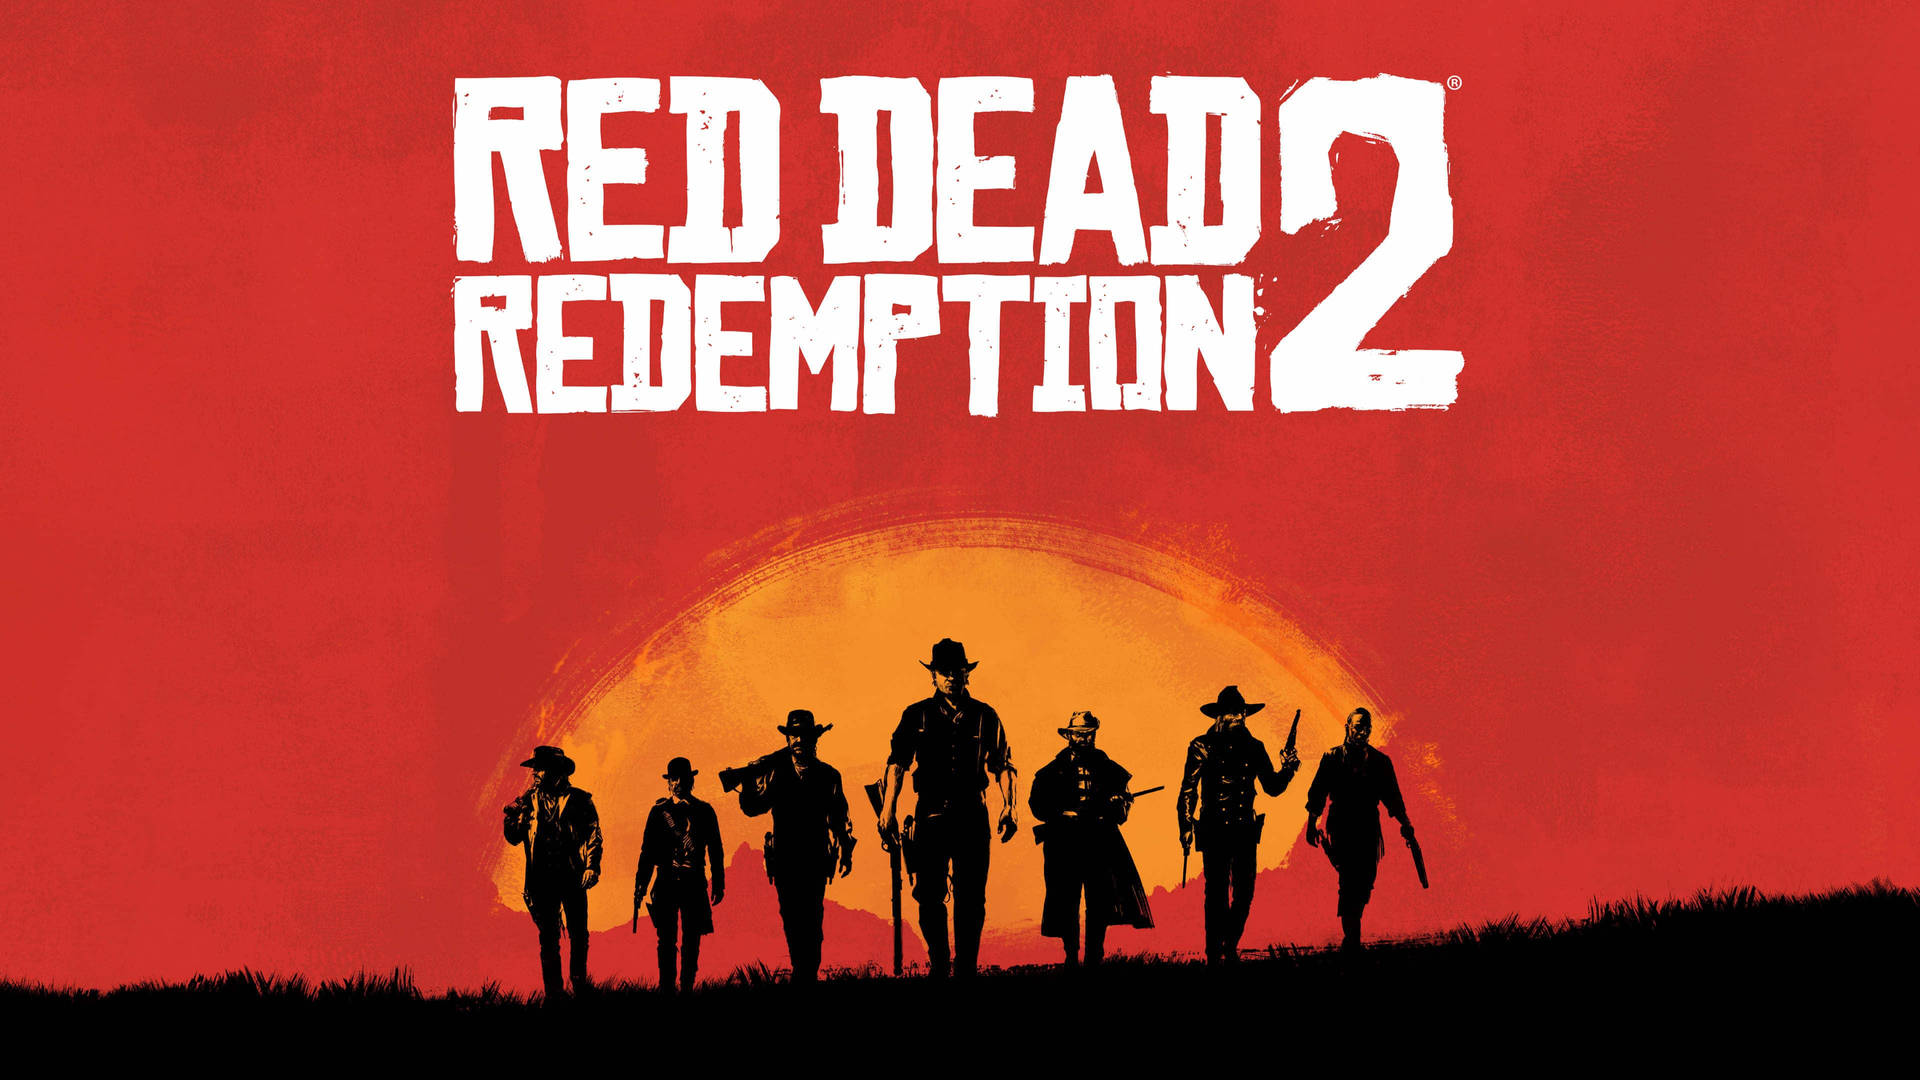 Red Dead Redemption 2-wal1